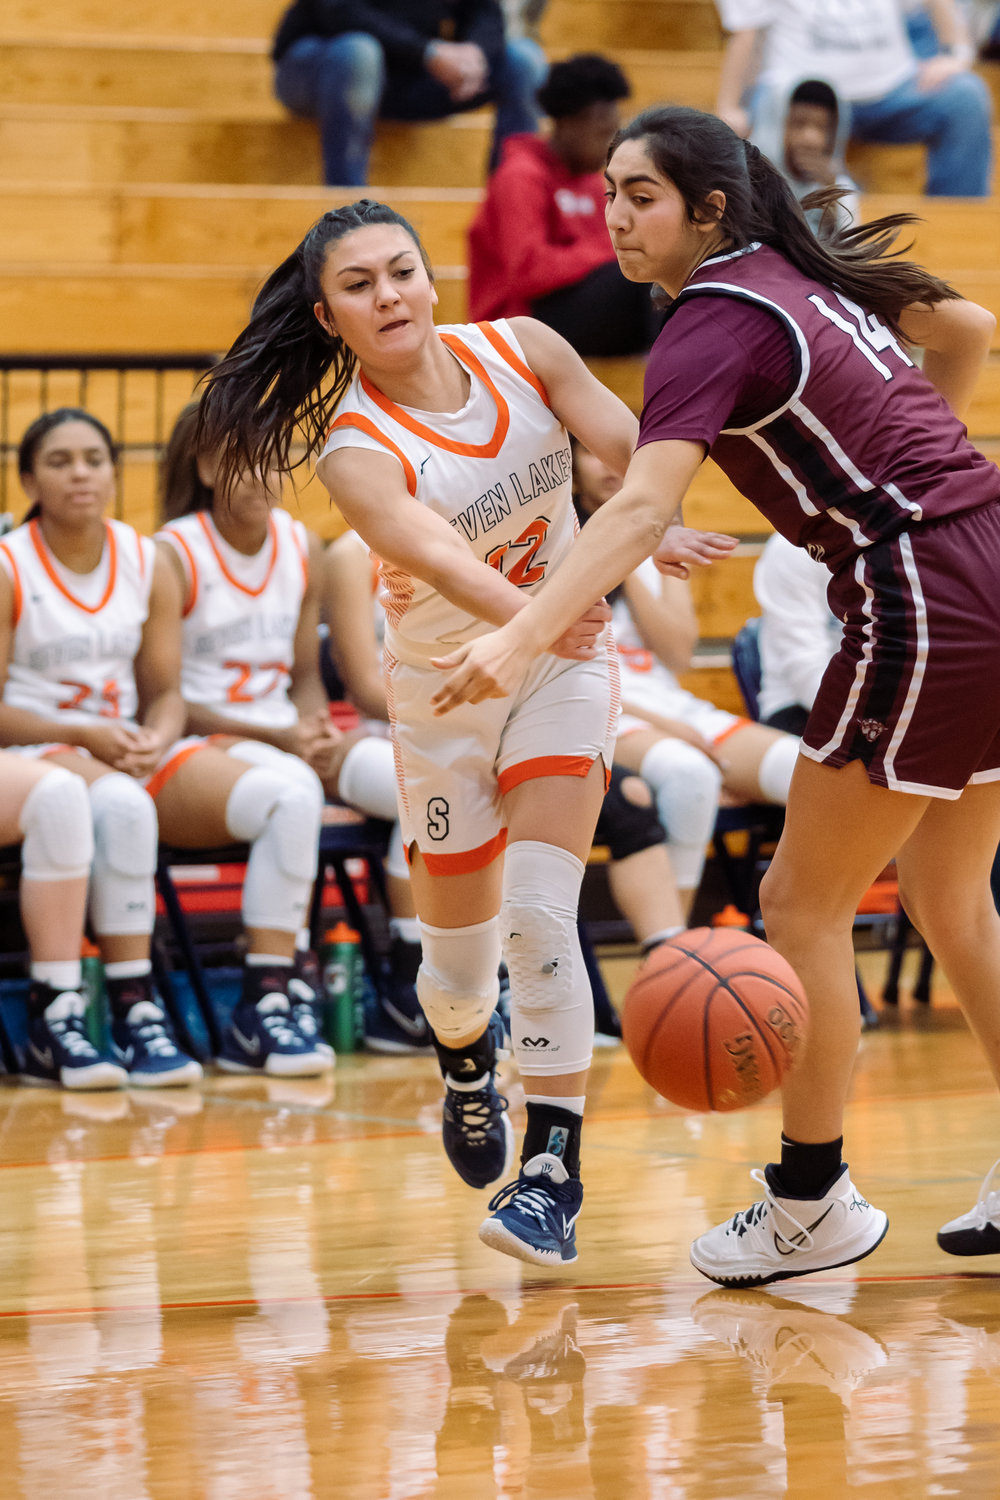 KK Tucker passes the ball during Tuesday's game against Cinco Ranch.